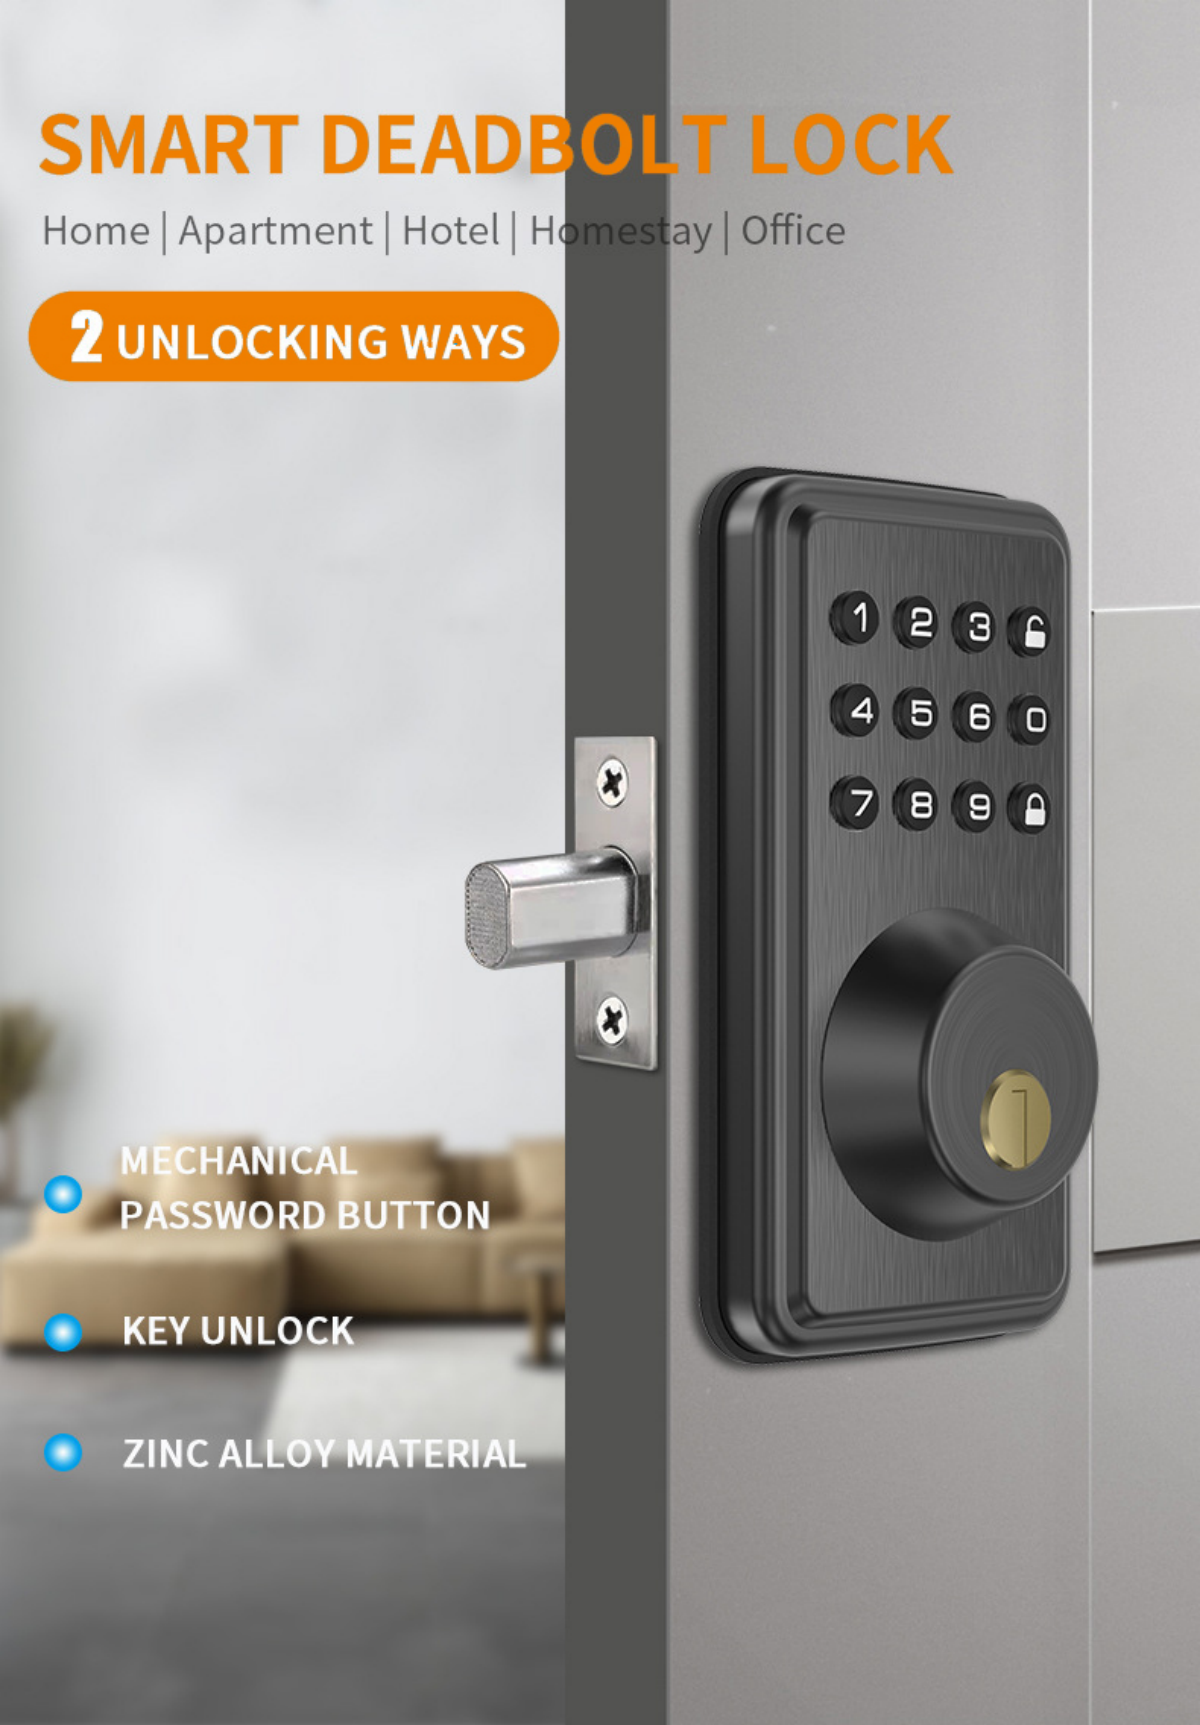 The digital door lock system market is set to experience significant growth in the coming years